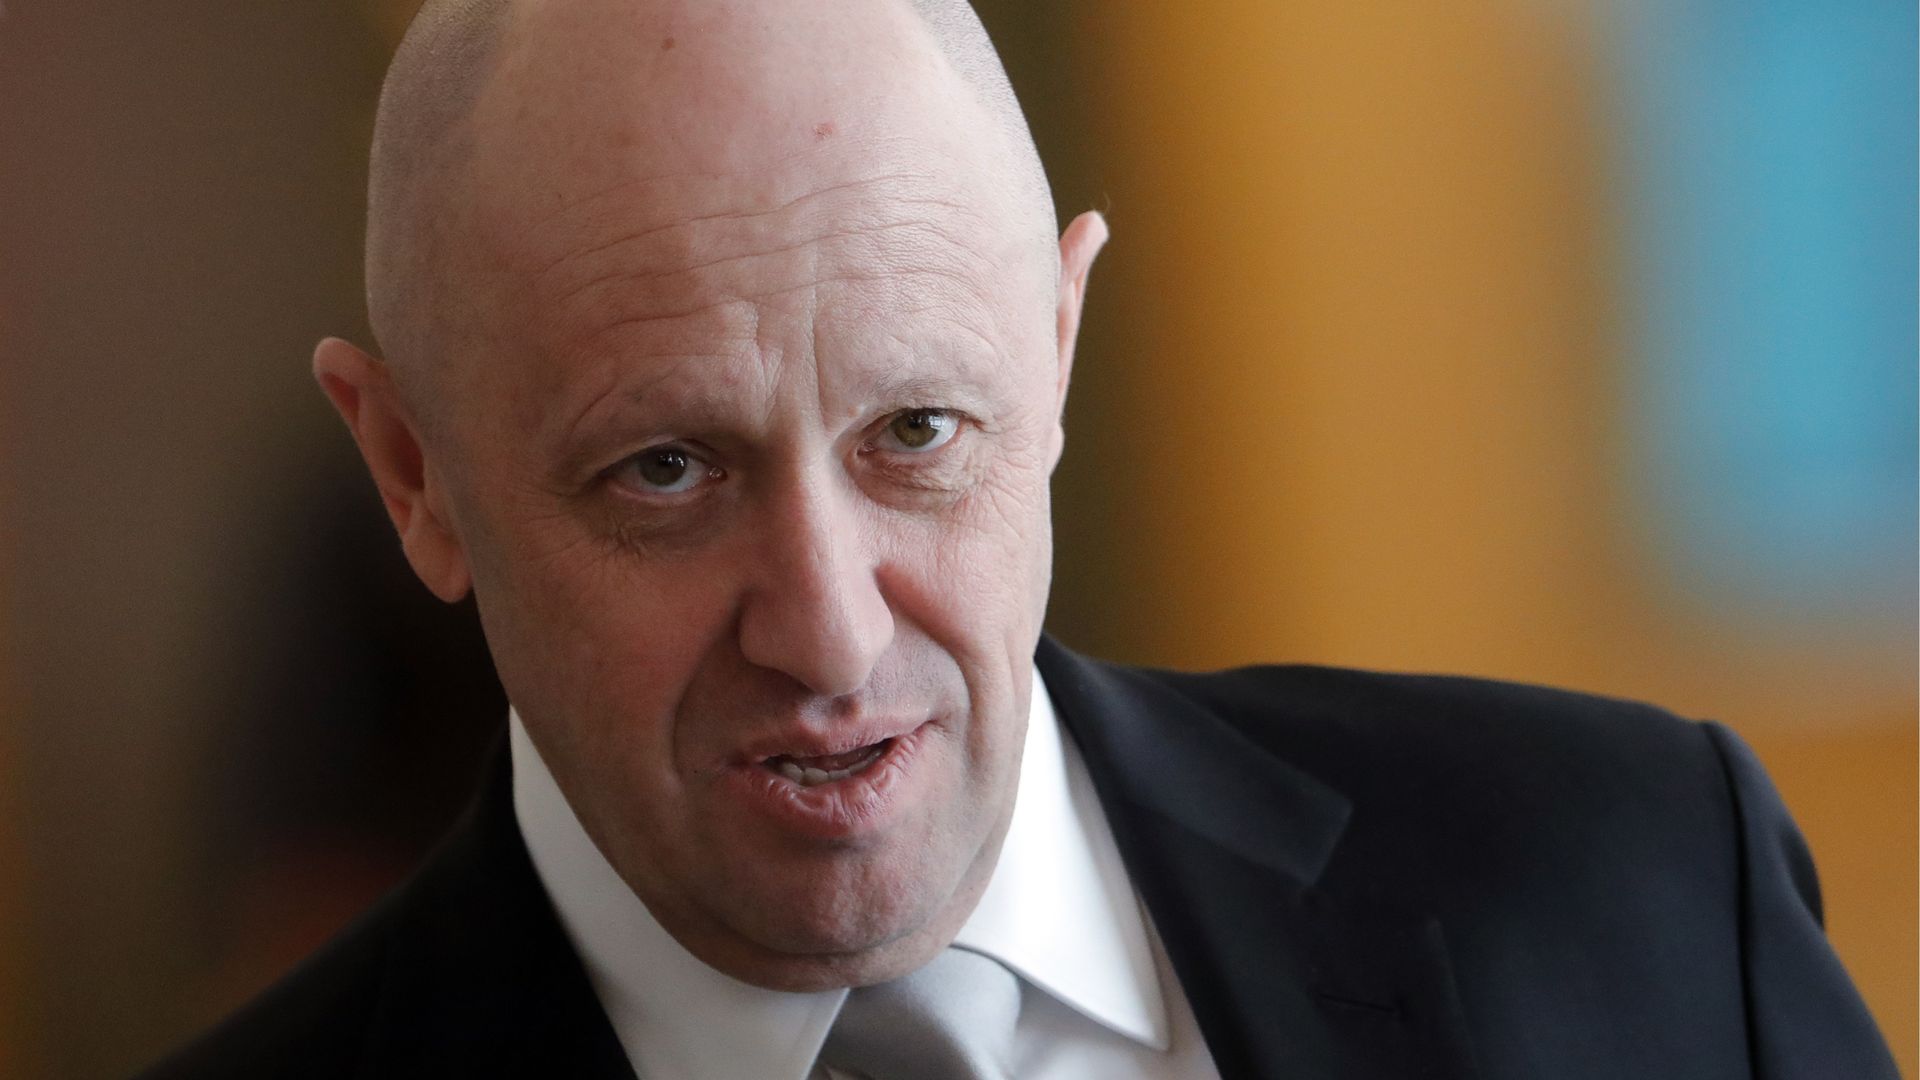 Yevgeny Prigozhin, a Russian businessman with close ties to President Vladimir Putin, in Moscow in March 2017.